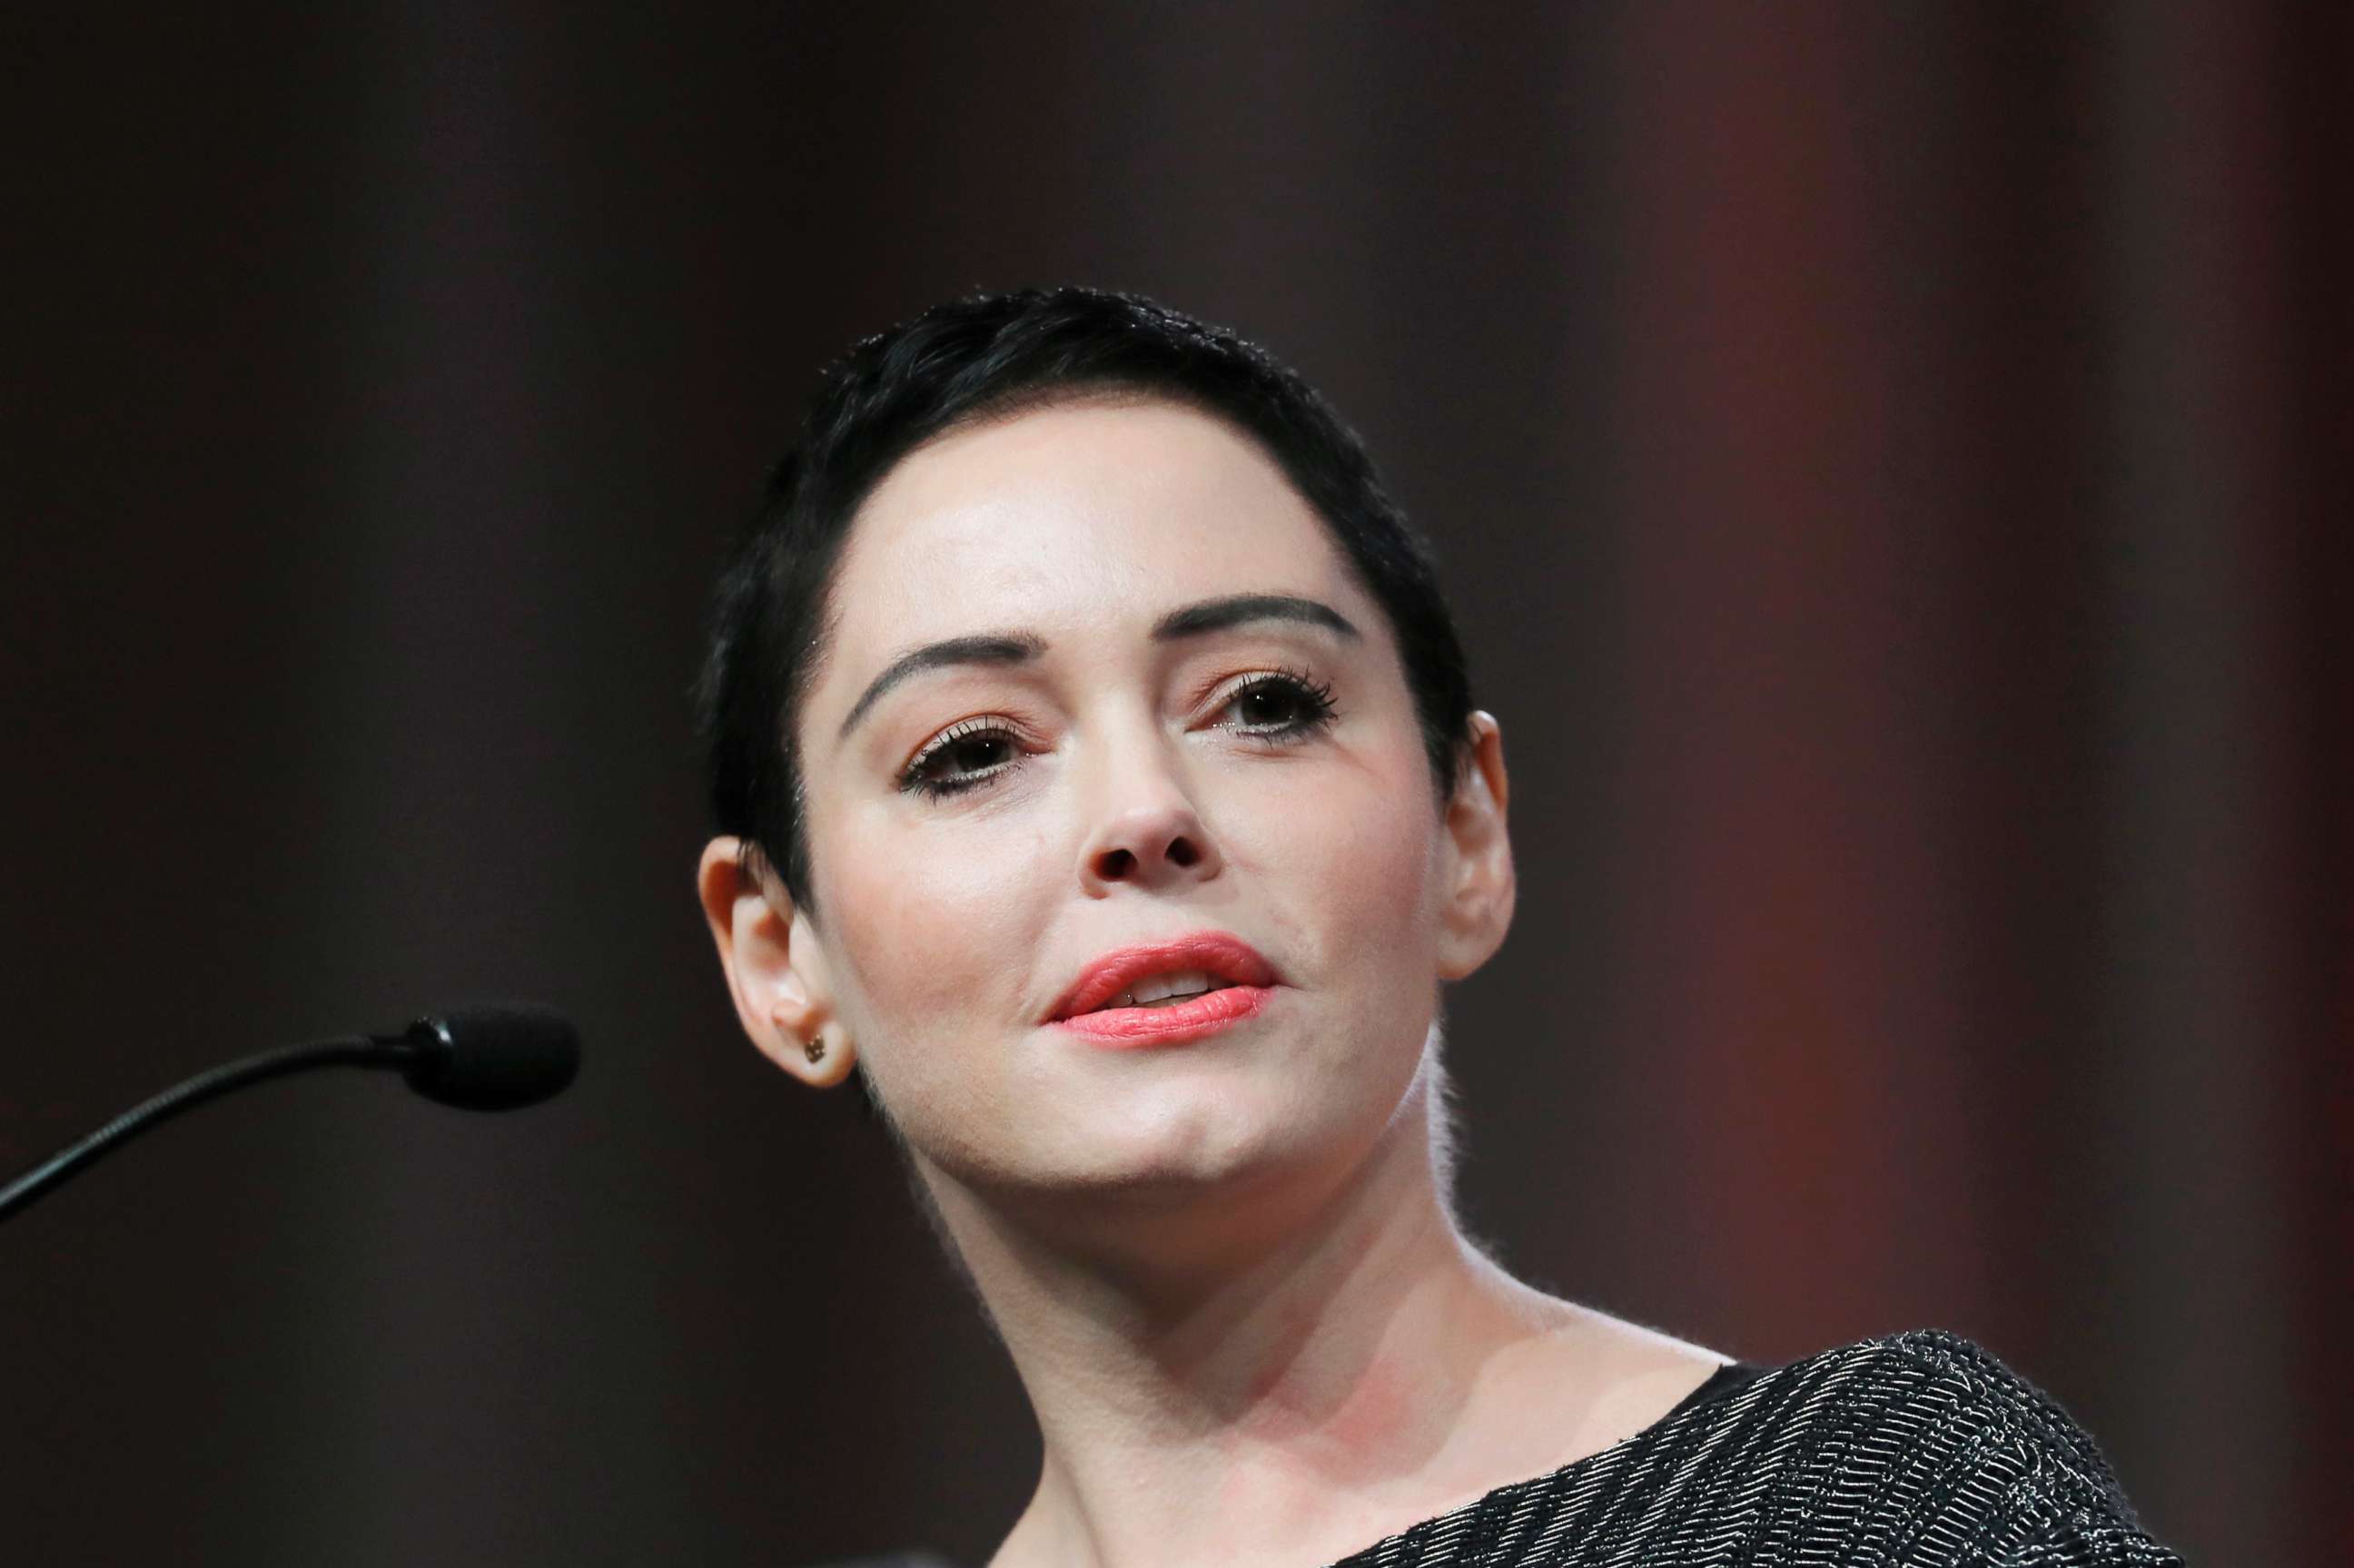 PHOTO: Rose McGowan speaks at the inaugural Women's Convention in Detroit.  